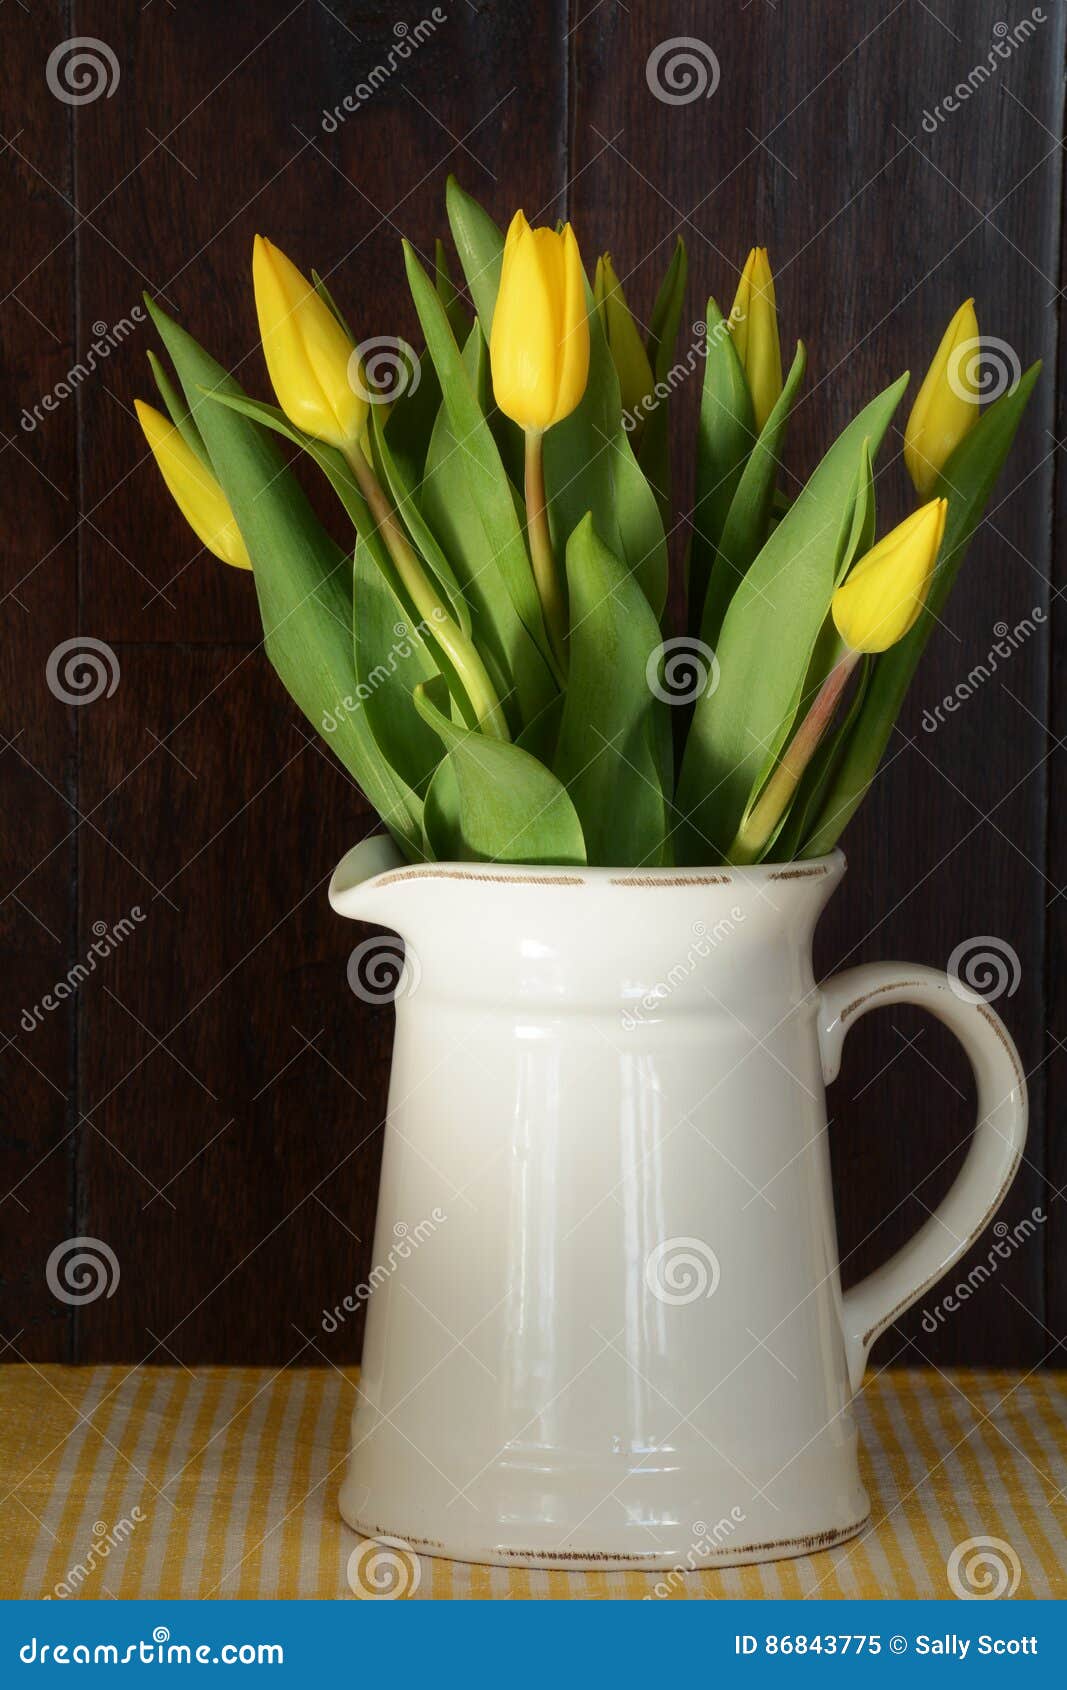 Yellow tulips in white jug stock image. Image of rustic - 86843775